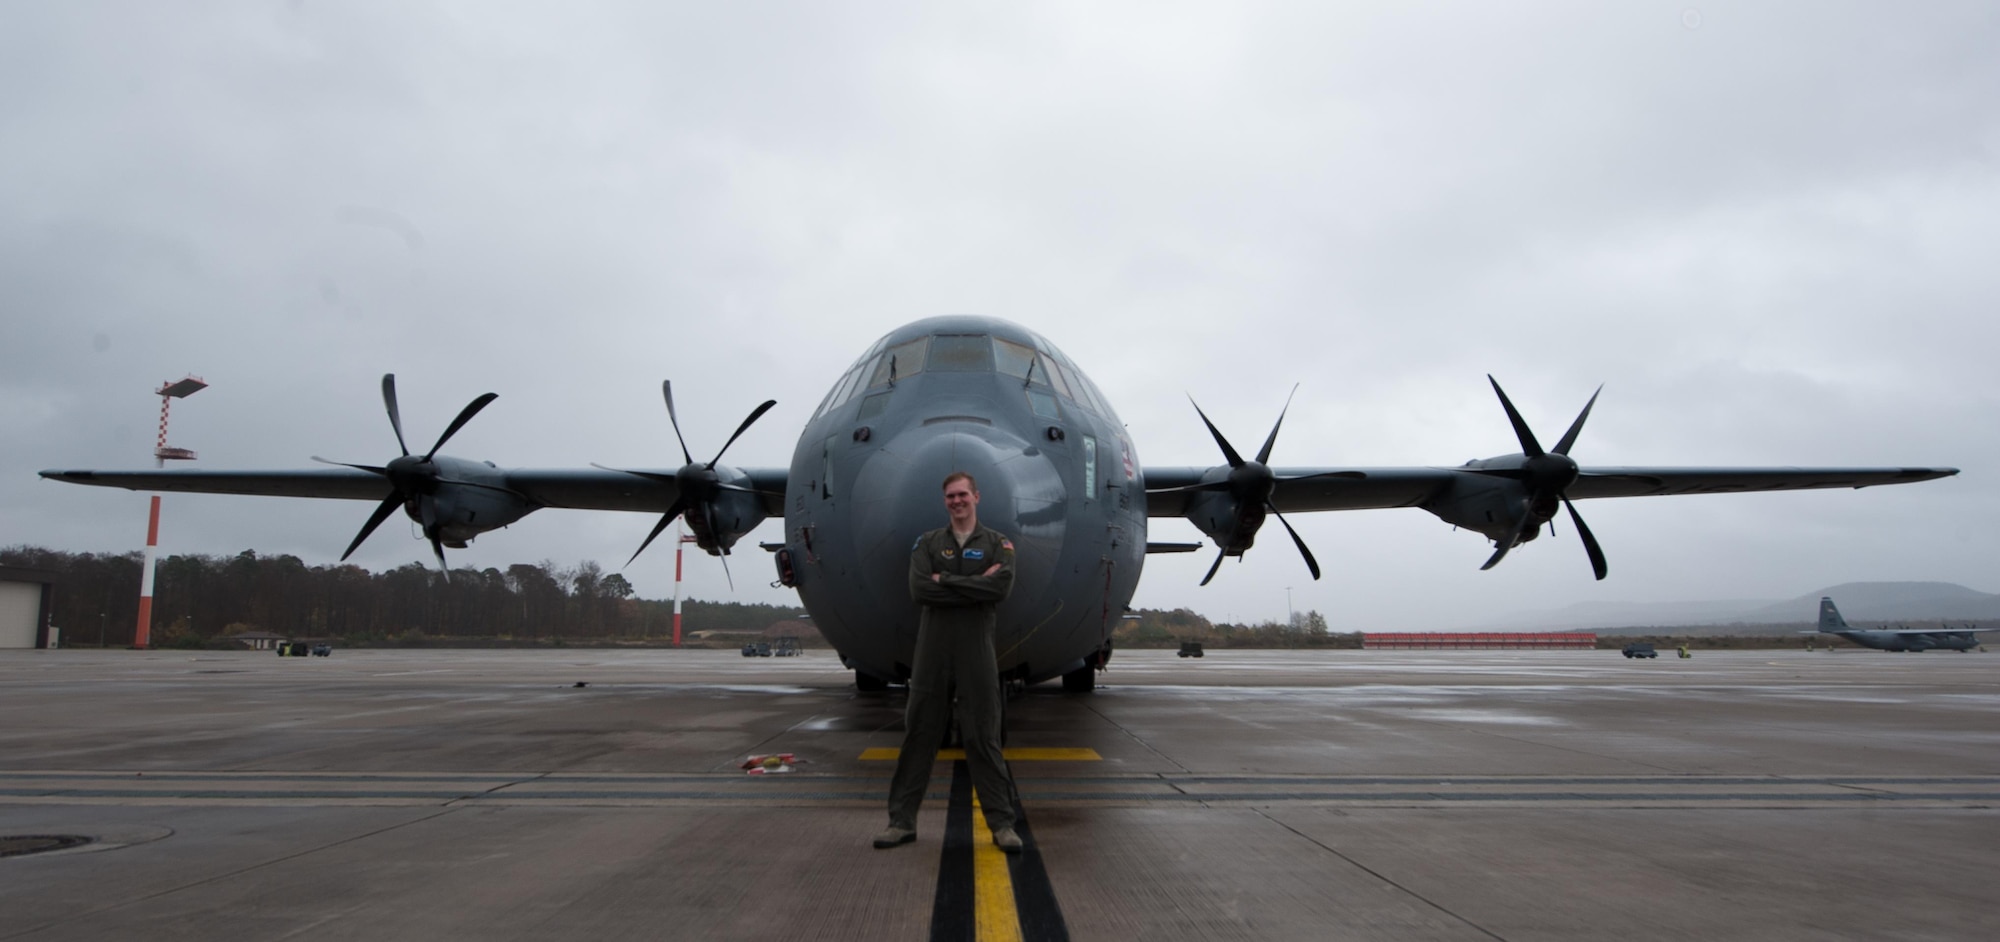 Airman 1st Class Patrick Stone, 37th Airlift Squadron loadmaster, poses in front of a C-130J Super Hercules at Ramstein Air Base, Germany, Nov. 17, 2016. Stone, along with wingman Staff Sgt. James Gaston, 37th AS loadmaster, worked together on creating a new repair program within their unit, which salvages usable parts from non-functional headsets to create complete units. In the first iteration of their program, Gaston and Stone were able to assemble nine fully-functional headsets from individual components, thus reducing the number of new headsets needing to be purchased. Together, they saved the Air Force $8,100. (U.S. Air Force photo by Airman 1st Class Lane T. Plummer)